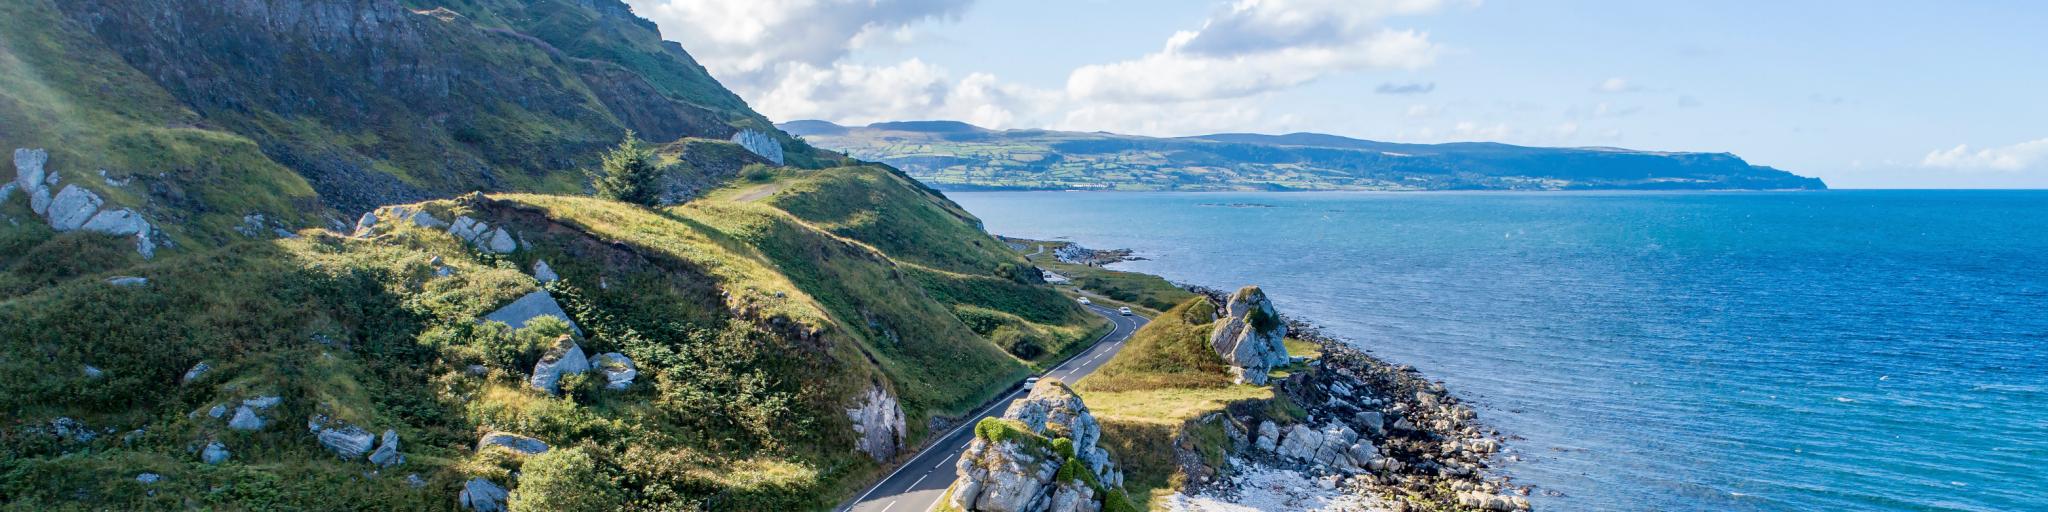 Tips for driving in Ireland - Causeway Costal Route